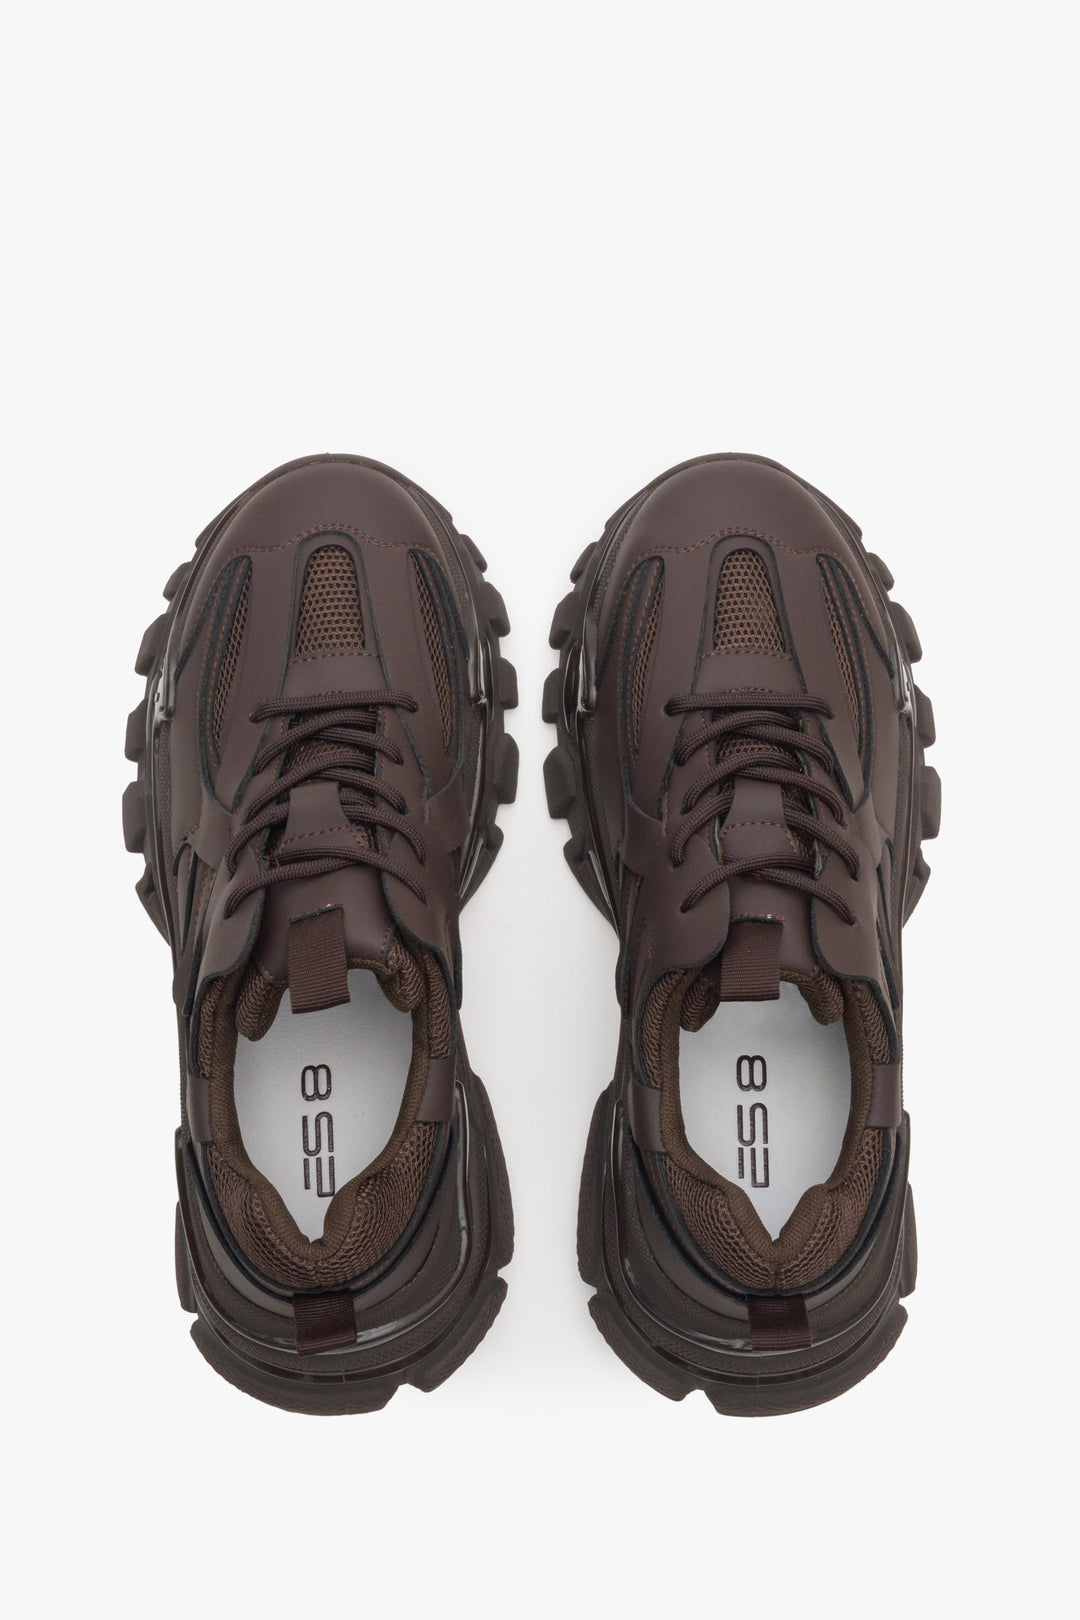 Women's dark brown sneakers ES 8 with lacing for spring and autumn - top view presentation of the footwear.